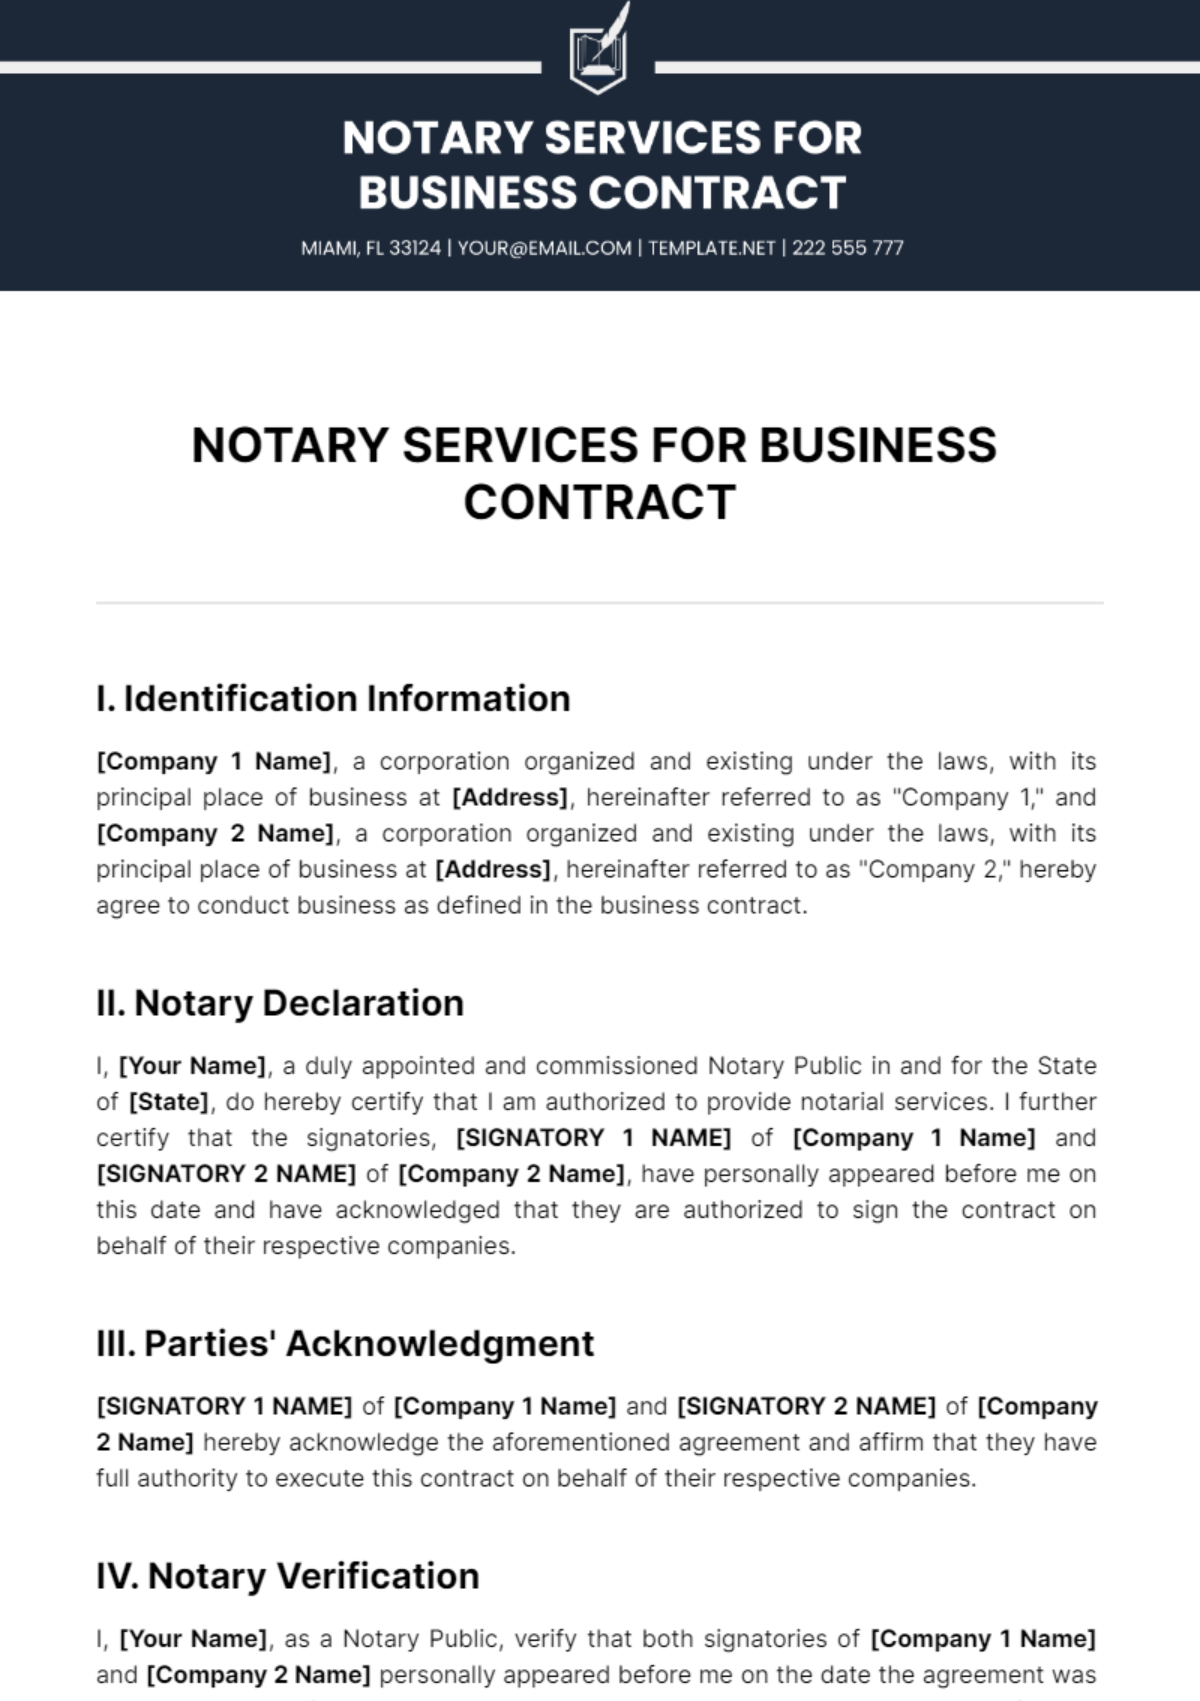 Free Notary Services for Business Contract Template